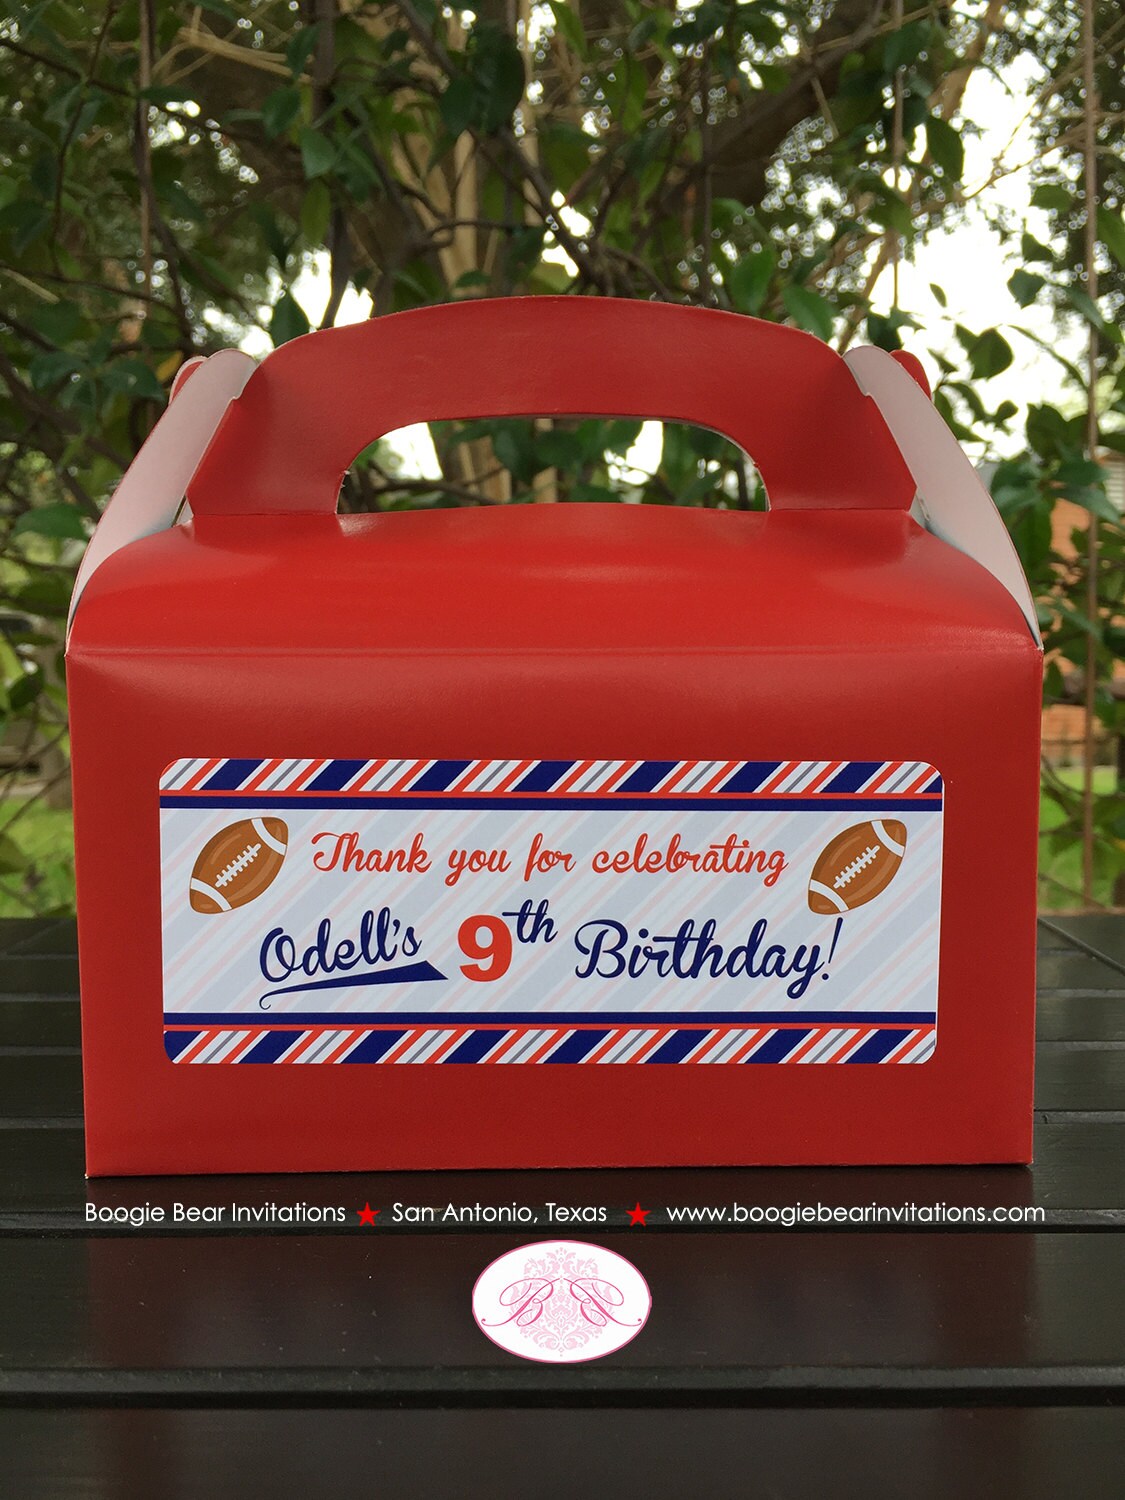 Football Birthday Party Treat Boxes Bag Red White Blue Favor Tag Touchdown Foot Ball Athletic Field Game Boogie Bear Invitations Odell Theme